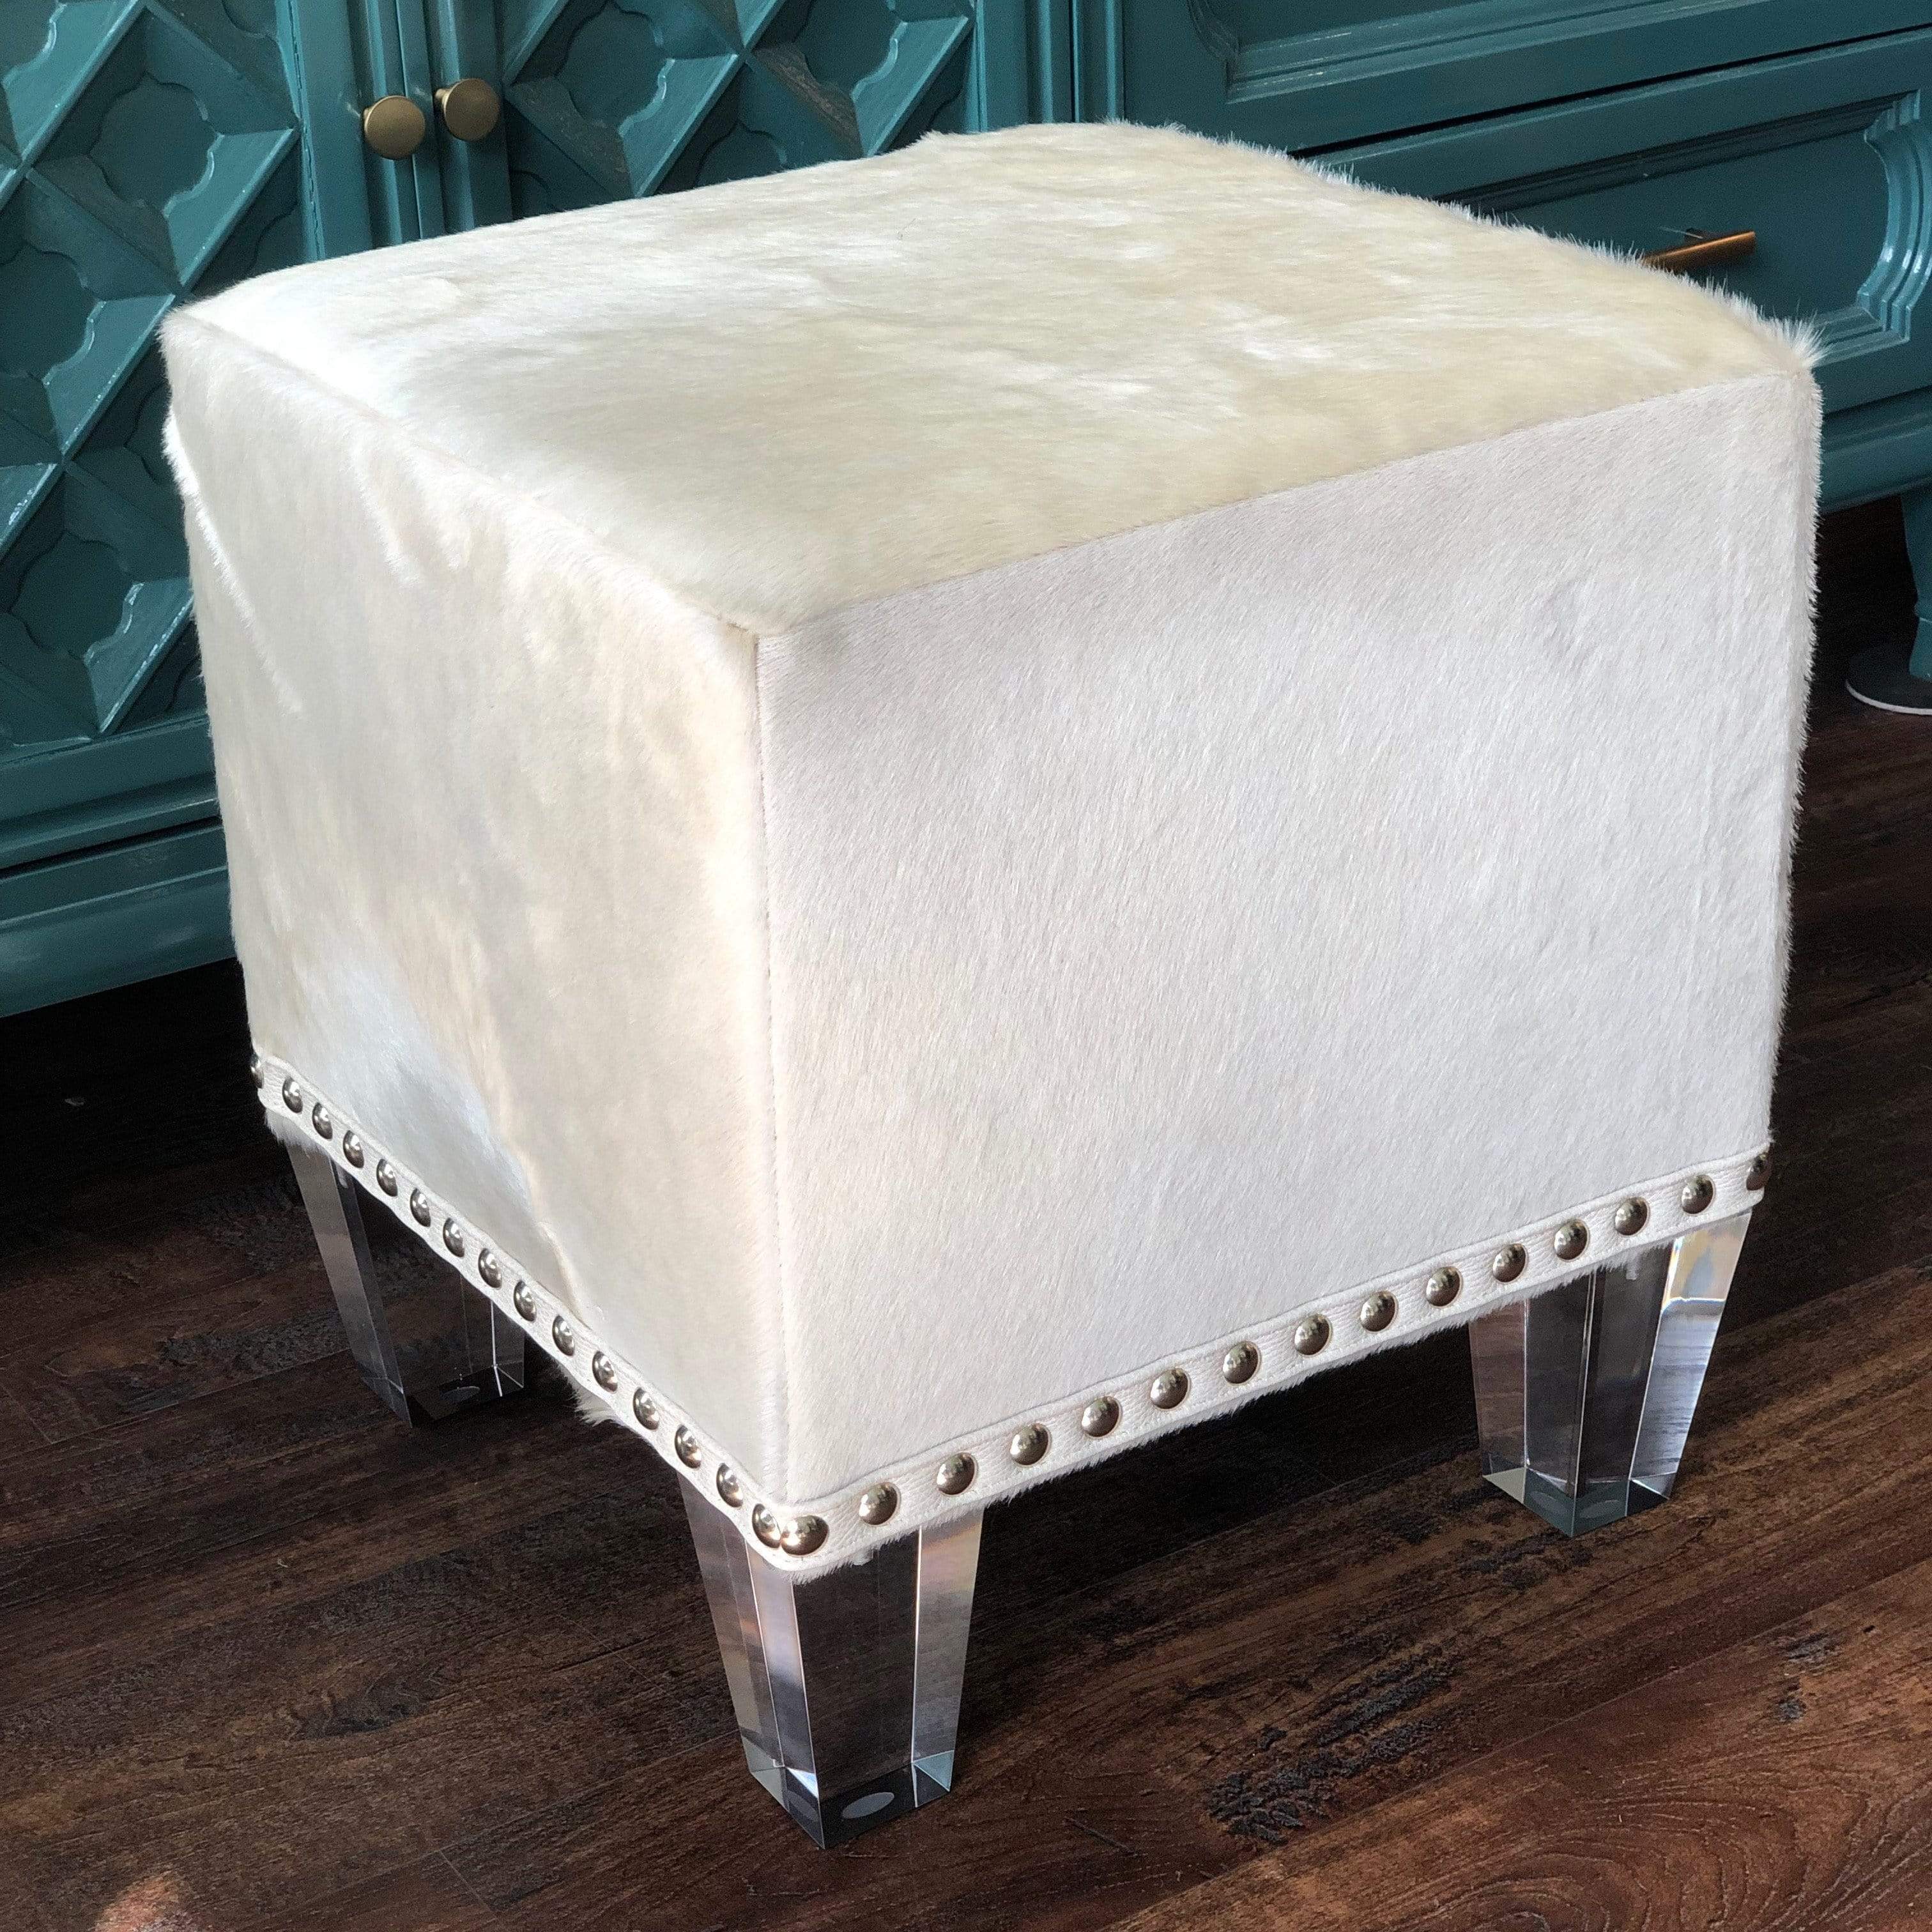 Hairhide Ottoman with Lucite Legs - PORCH